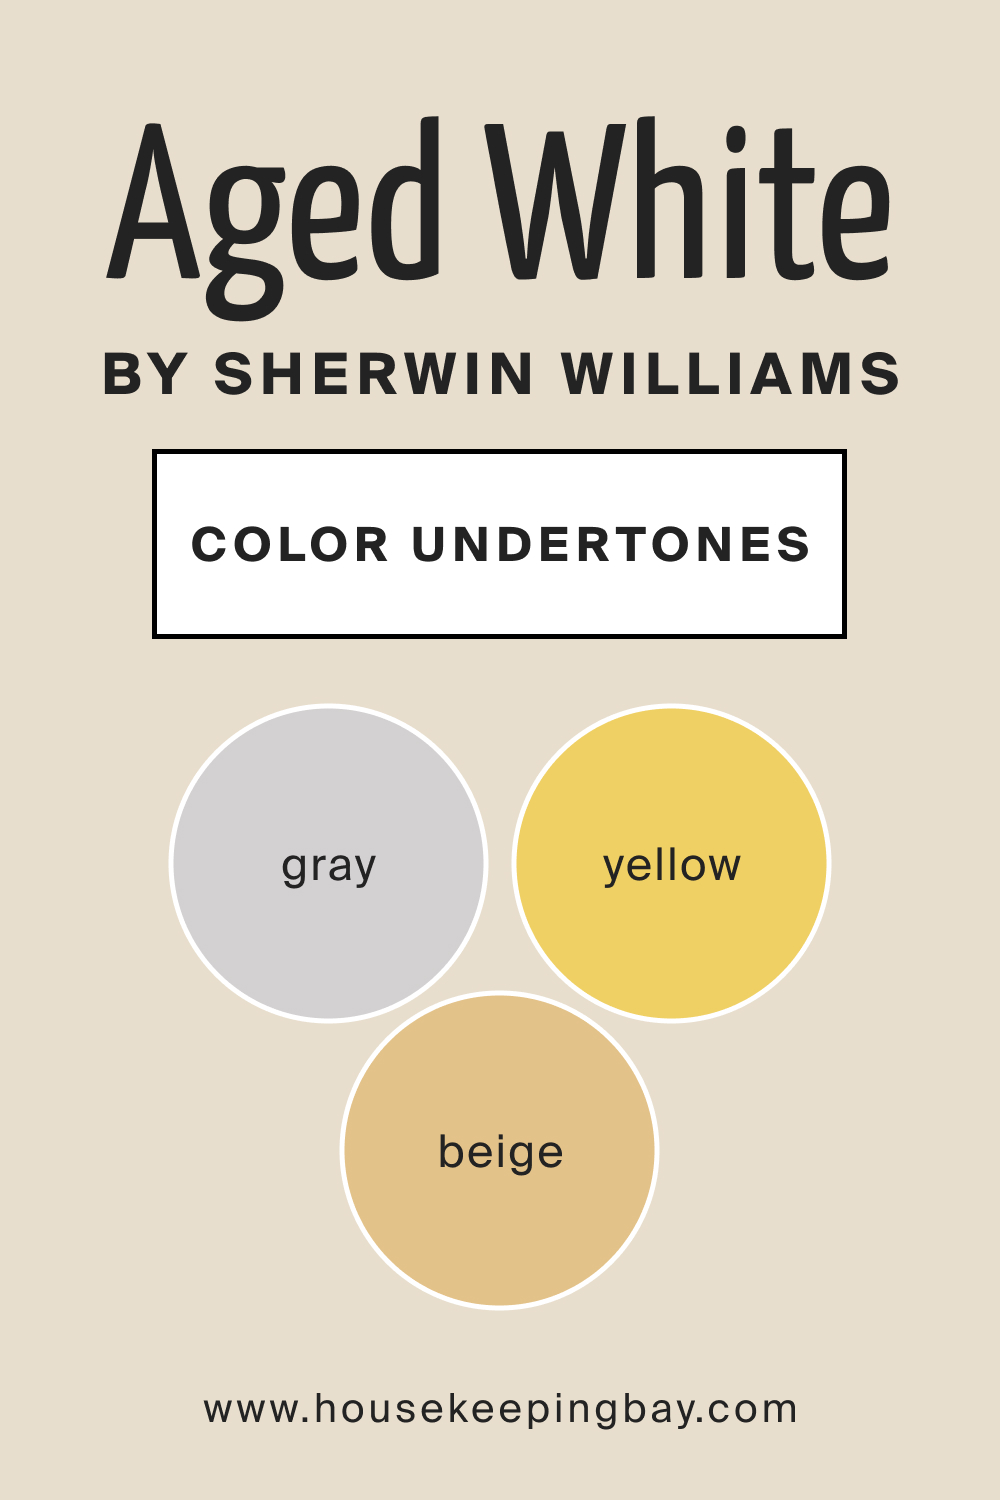 SW Aged White by Sherwin Williams Main Color Undertone